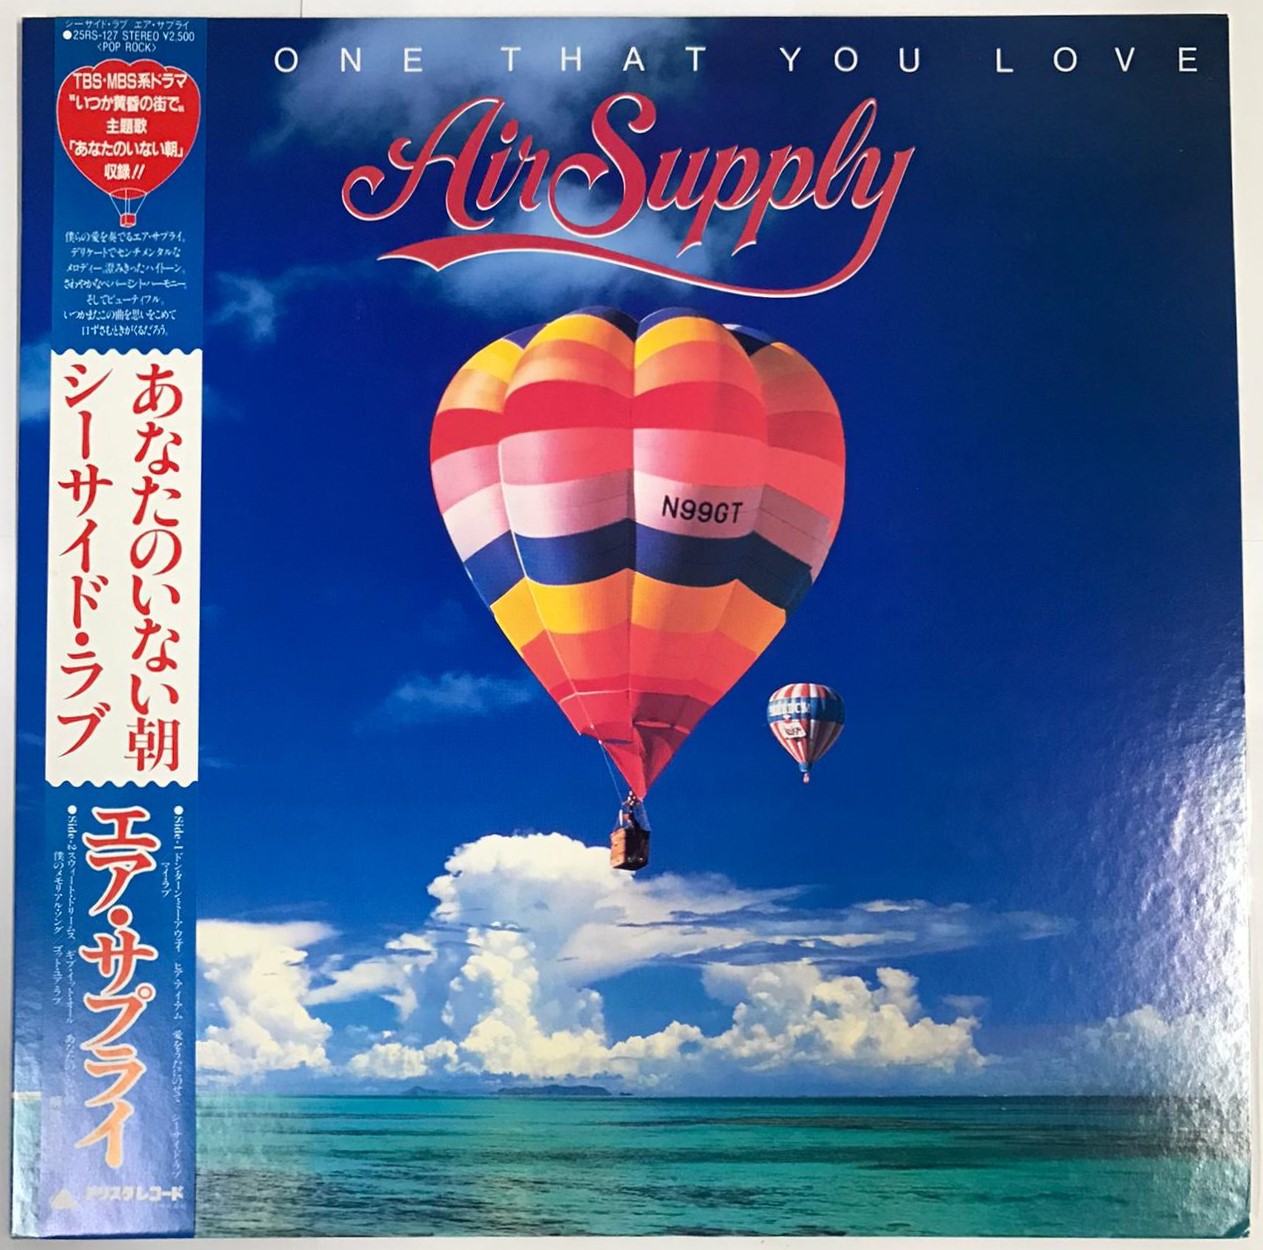 Air Supply - The One That You Love Vinyl